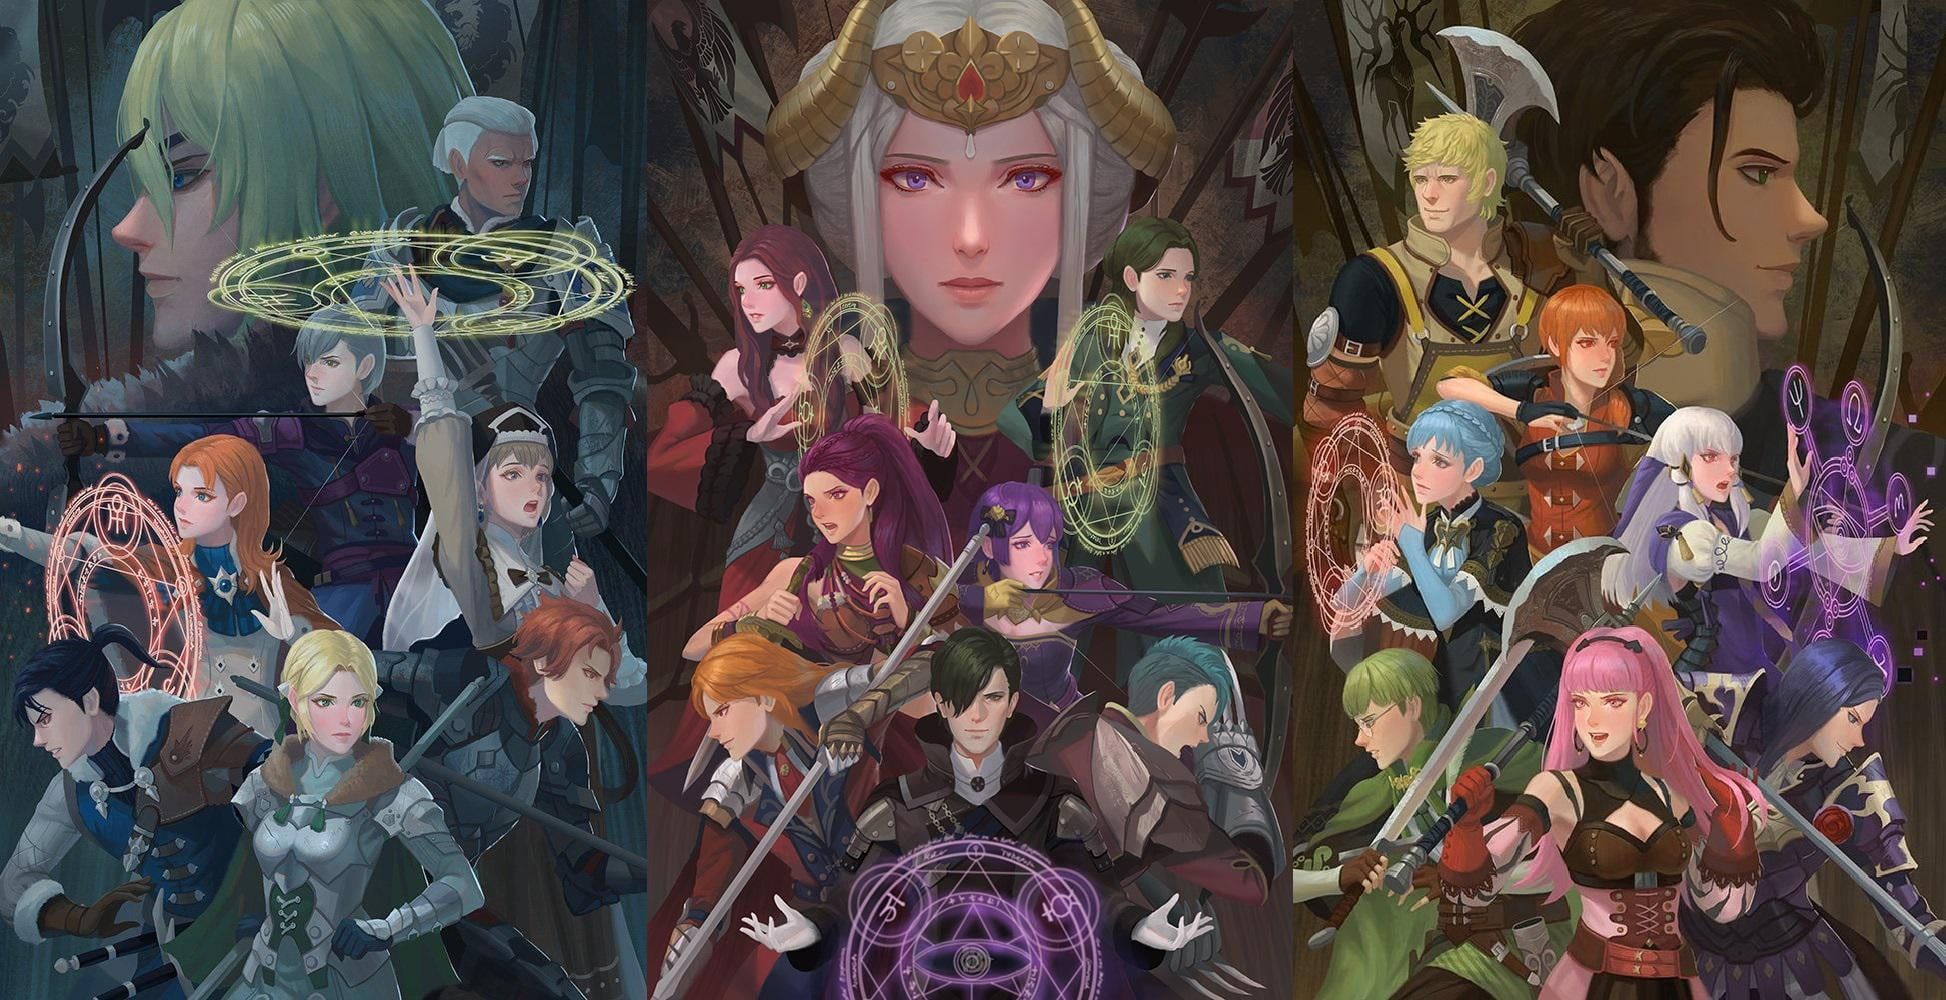 Fire Emblem fire emblem three houses video game characters video games #anime fantasy art P #wallpaper. Fire emblem, Fire emblem wallpaper, Fire emblem games